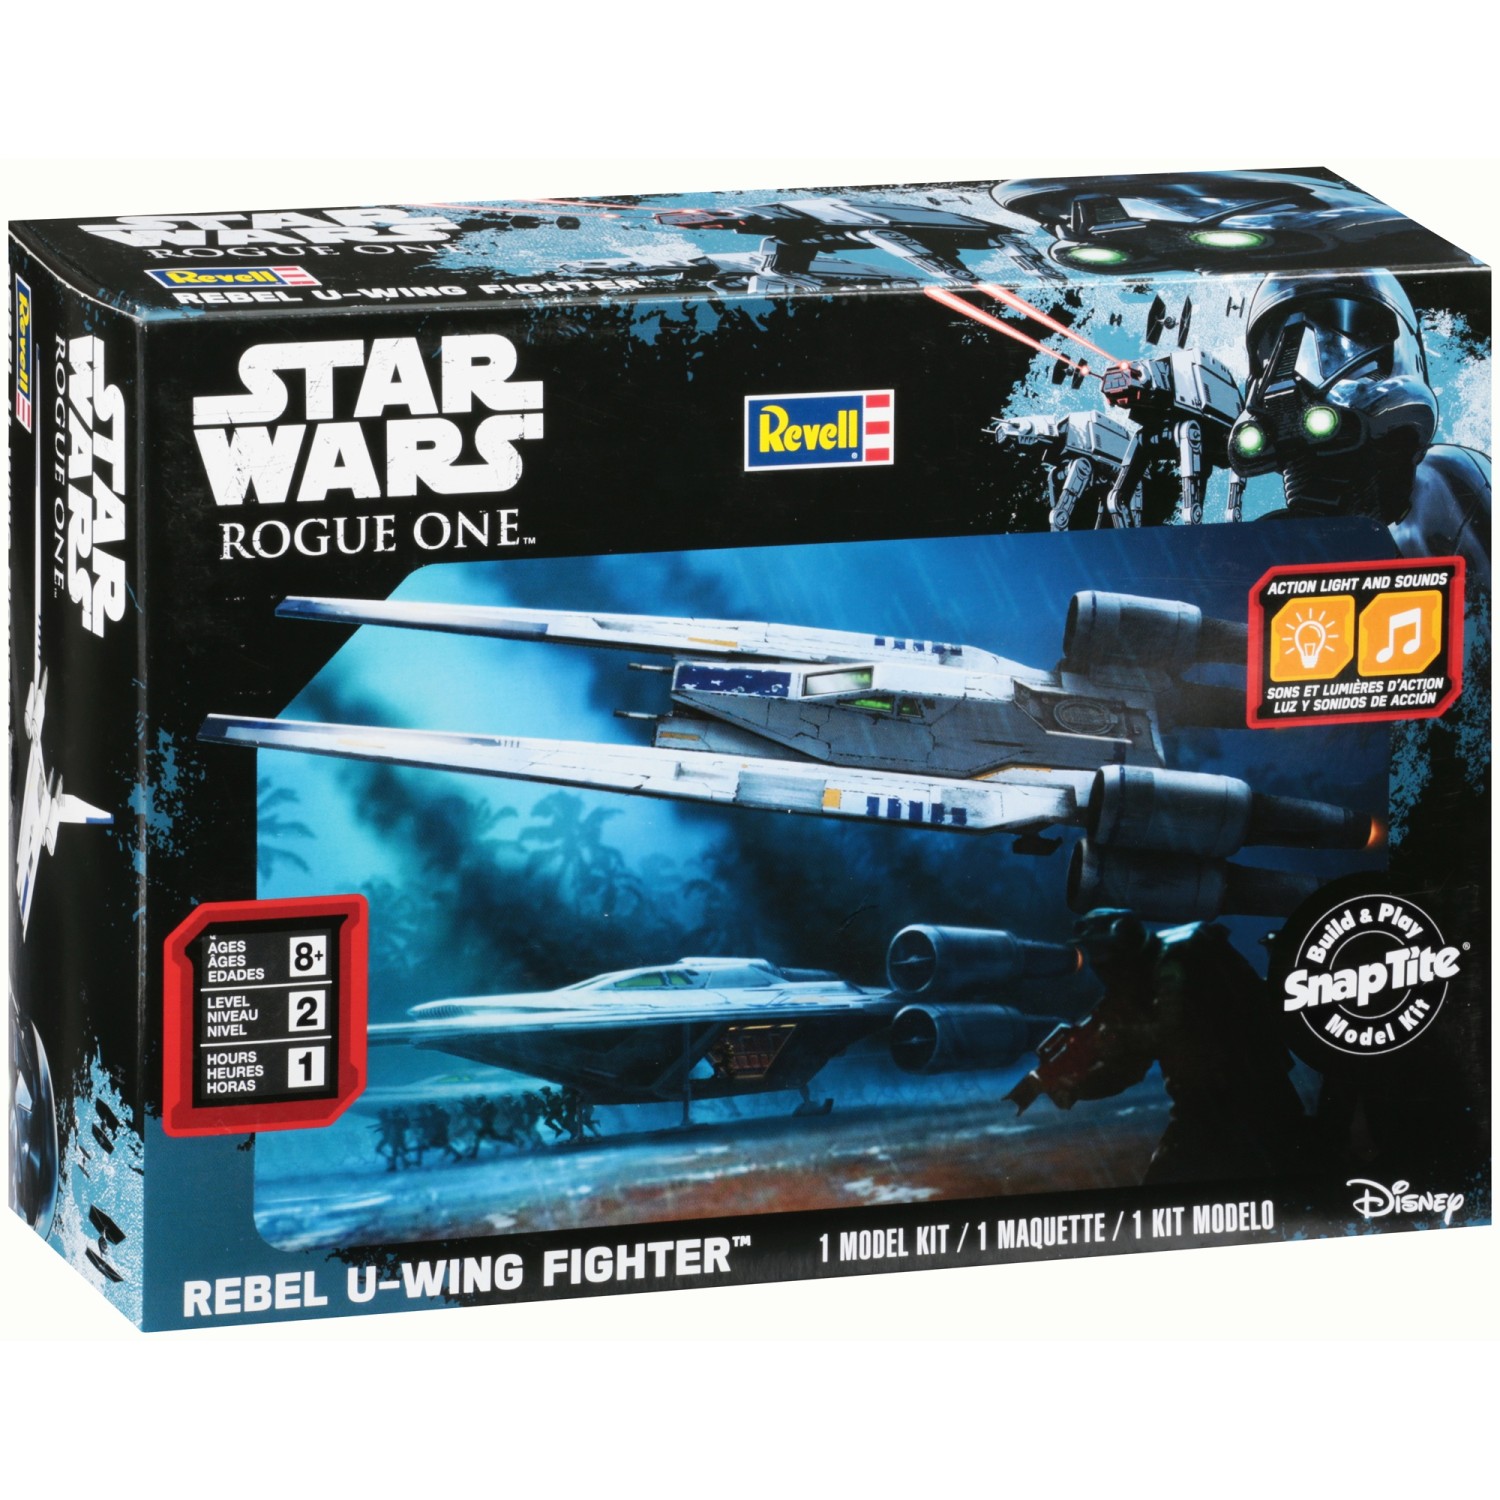 Revell Star Wars Rogue One Rebel U-wing Fighter Snap Tite Rmx851637 Sounds for sale online 